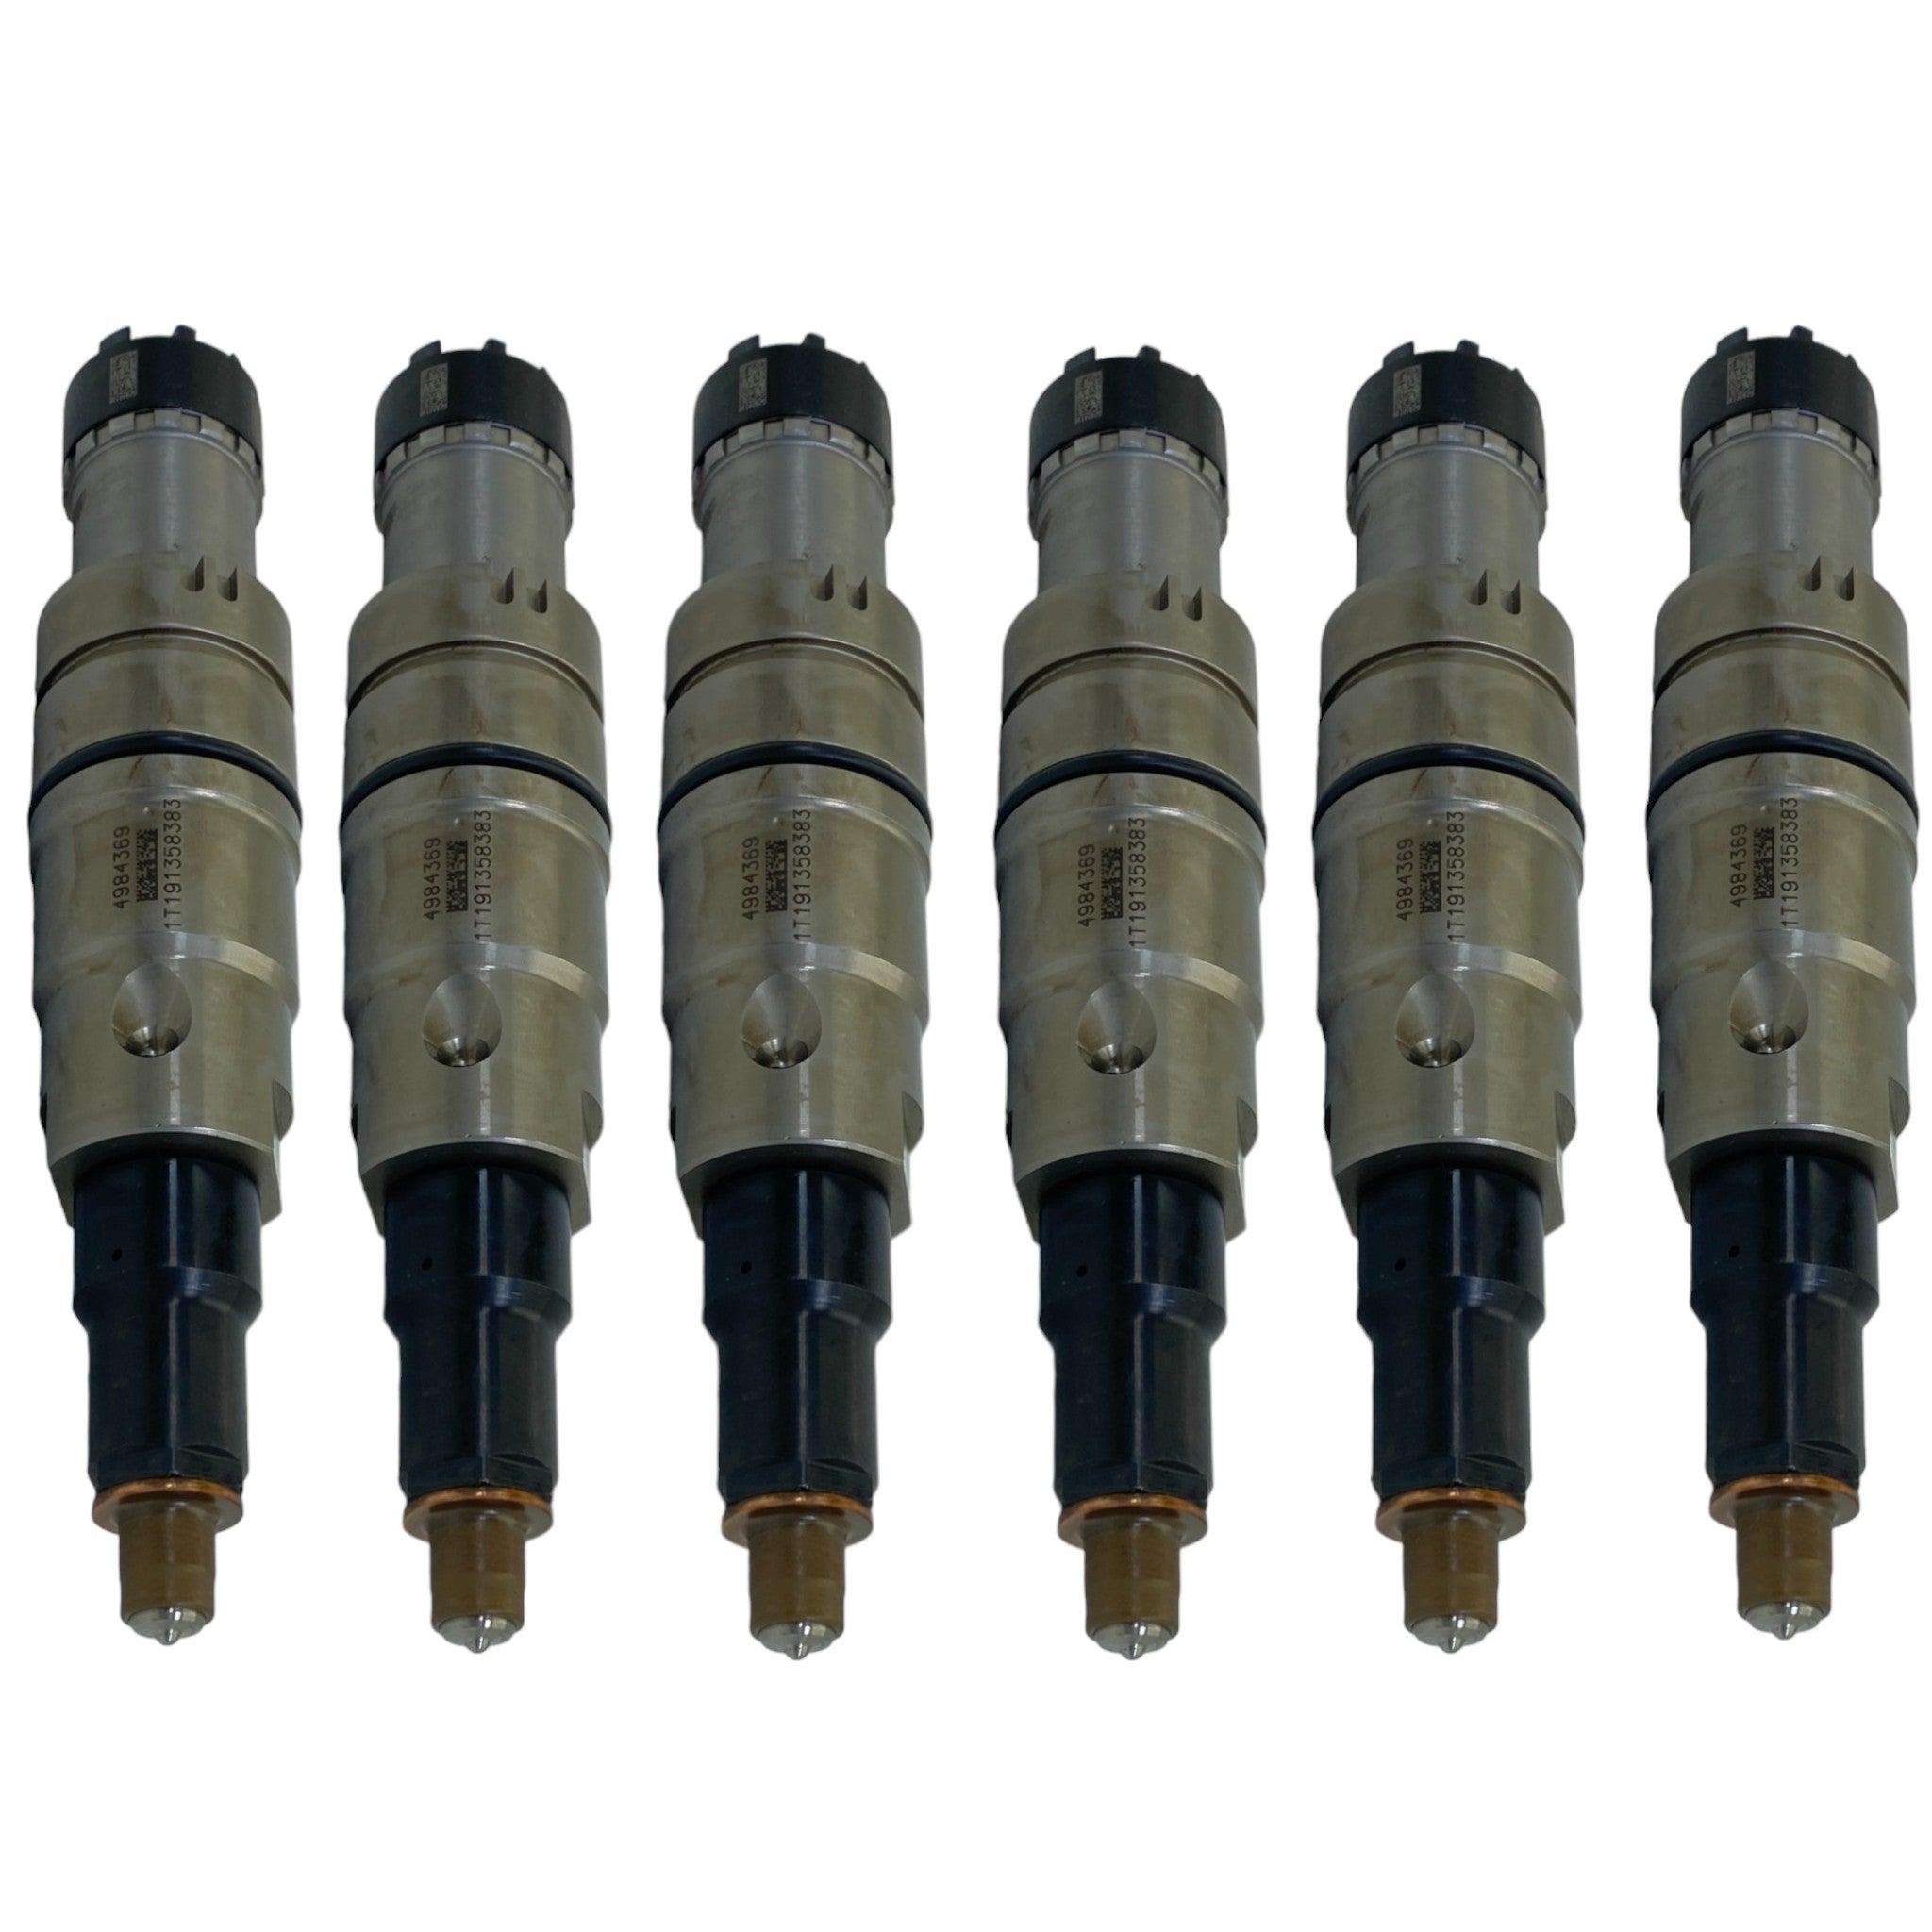 5579419 Genuine Cummins Fuel Injectors Set Of Six For Xpi Fuel Systems On Epa13 15L Isx/Qsx Engines